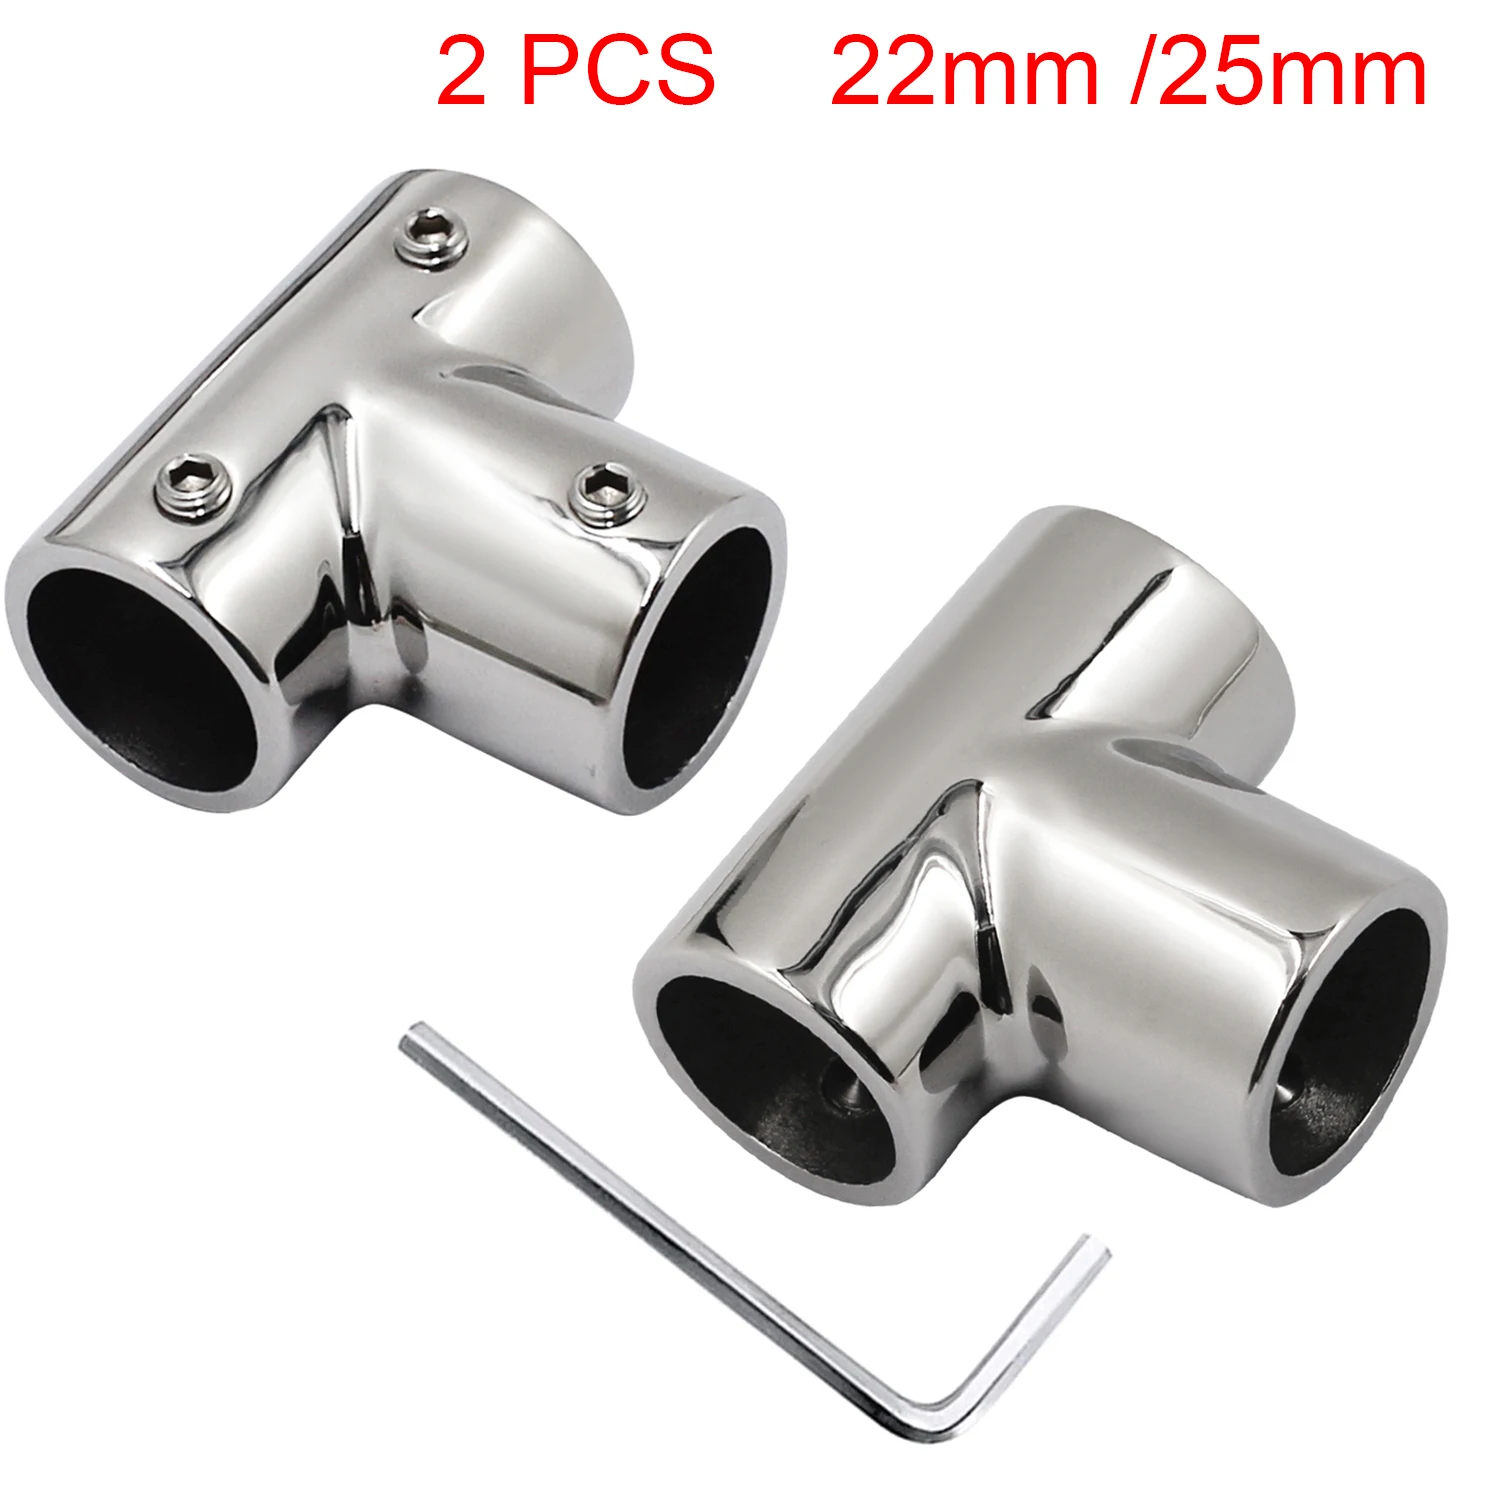 2 Pcs Stainless Steel 316 Marine Boat 3 Way Handrail Fitting 90° Deck Hand Rail Tee Joint Connector for 22mm/25mm Tube/Pipe